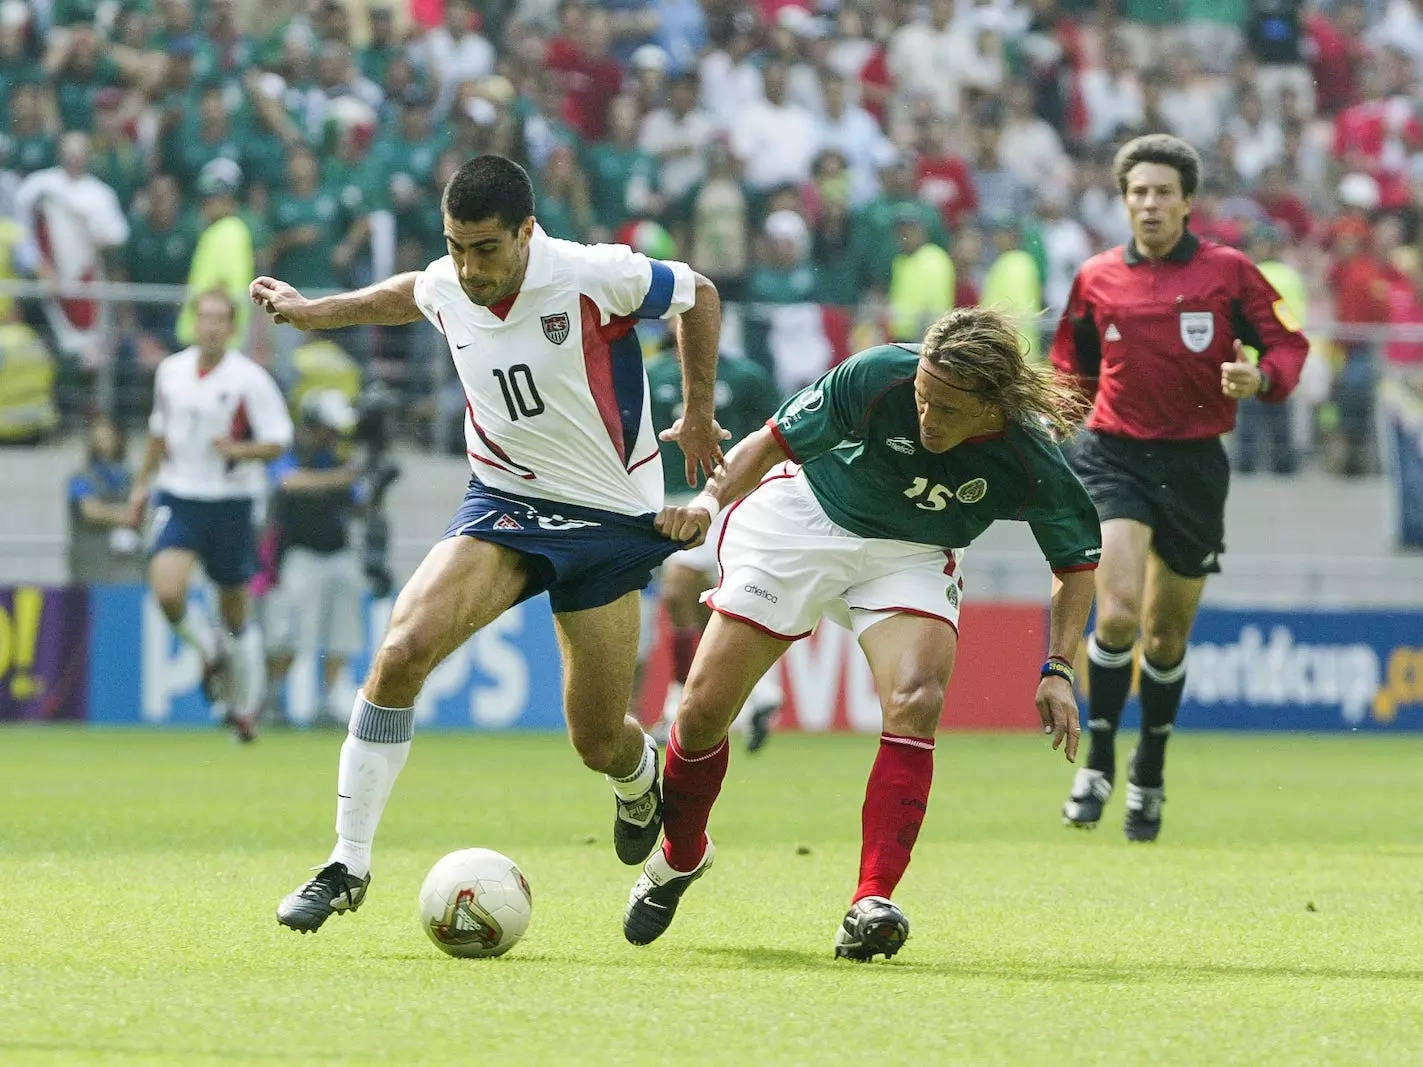 Claudio Reyna of the USA and Luis Hernandez of Mexico in action during the World Cup round of Sixteen match between Mexico (0) and USA (2) at the Jeonju World Cup Stadium.